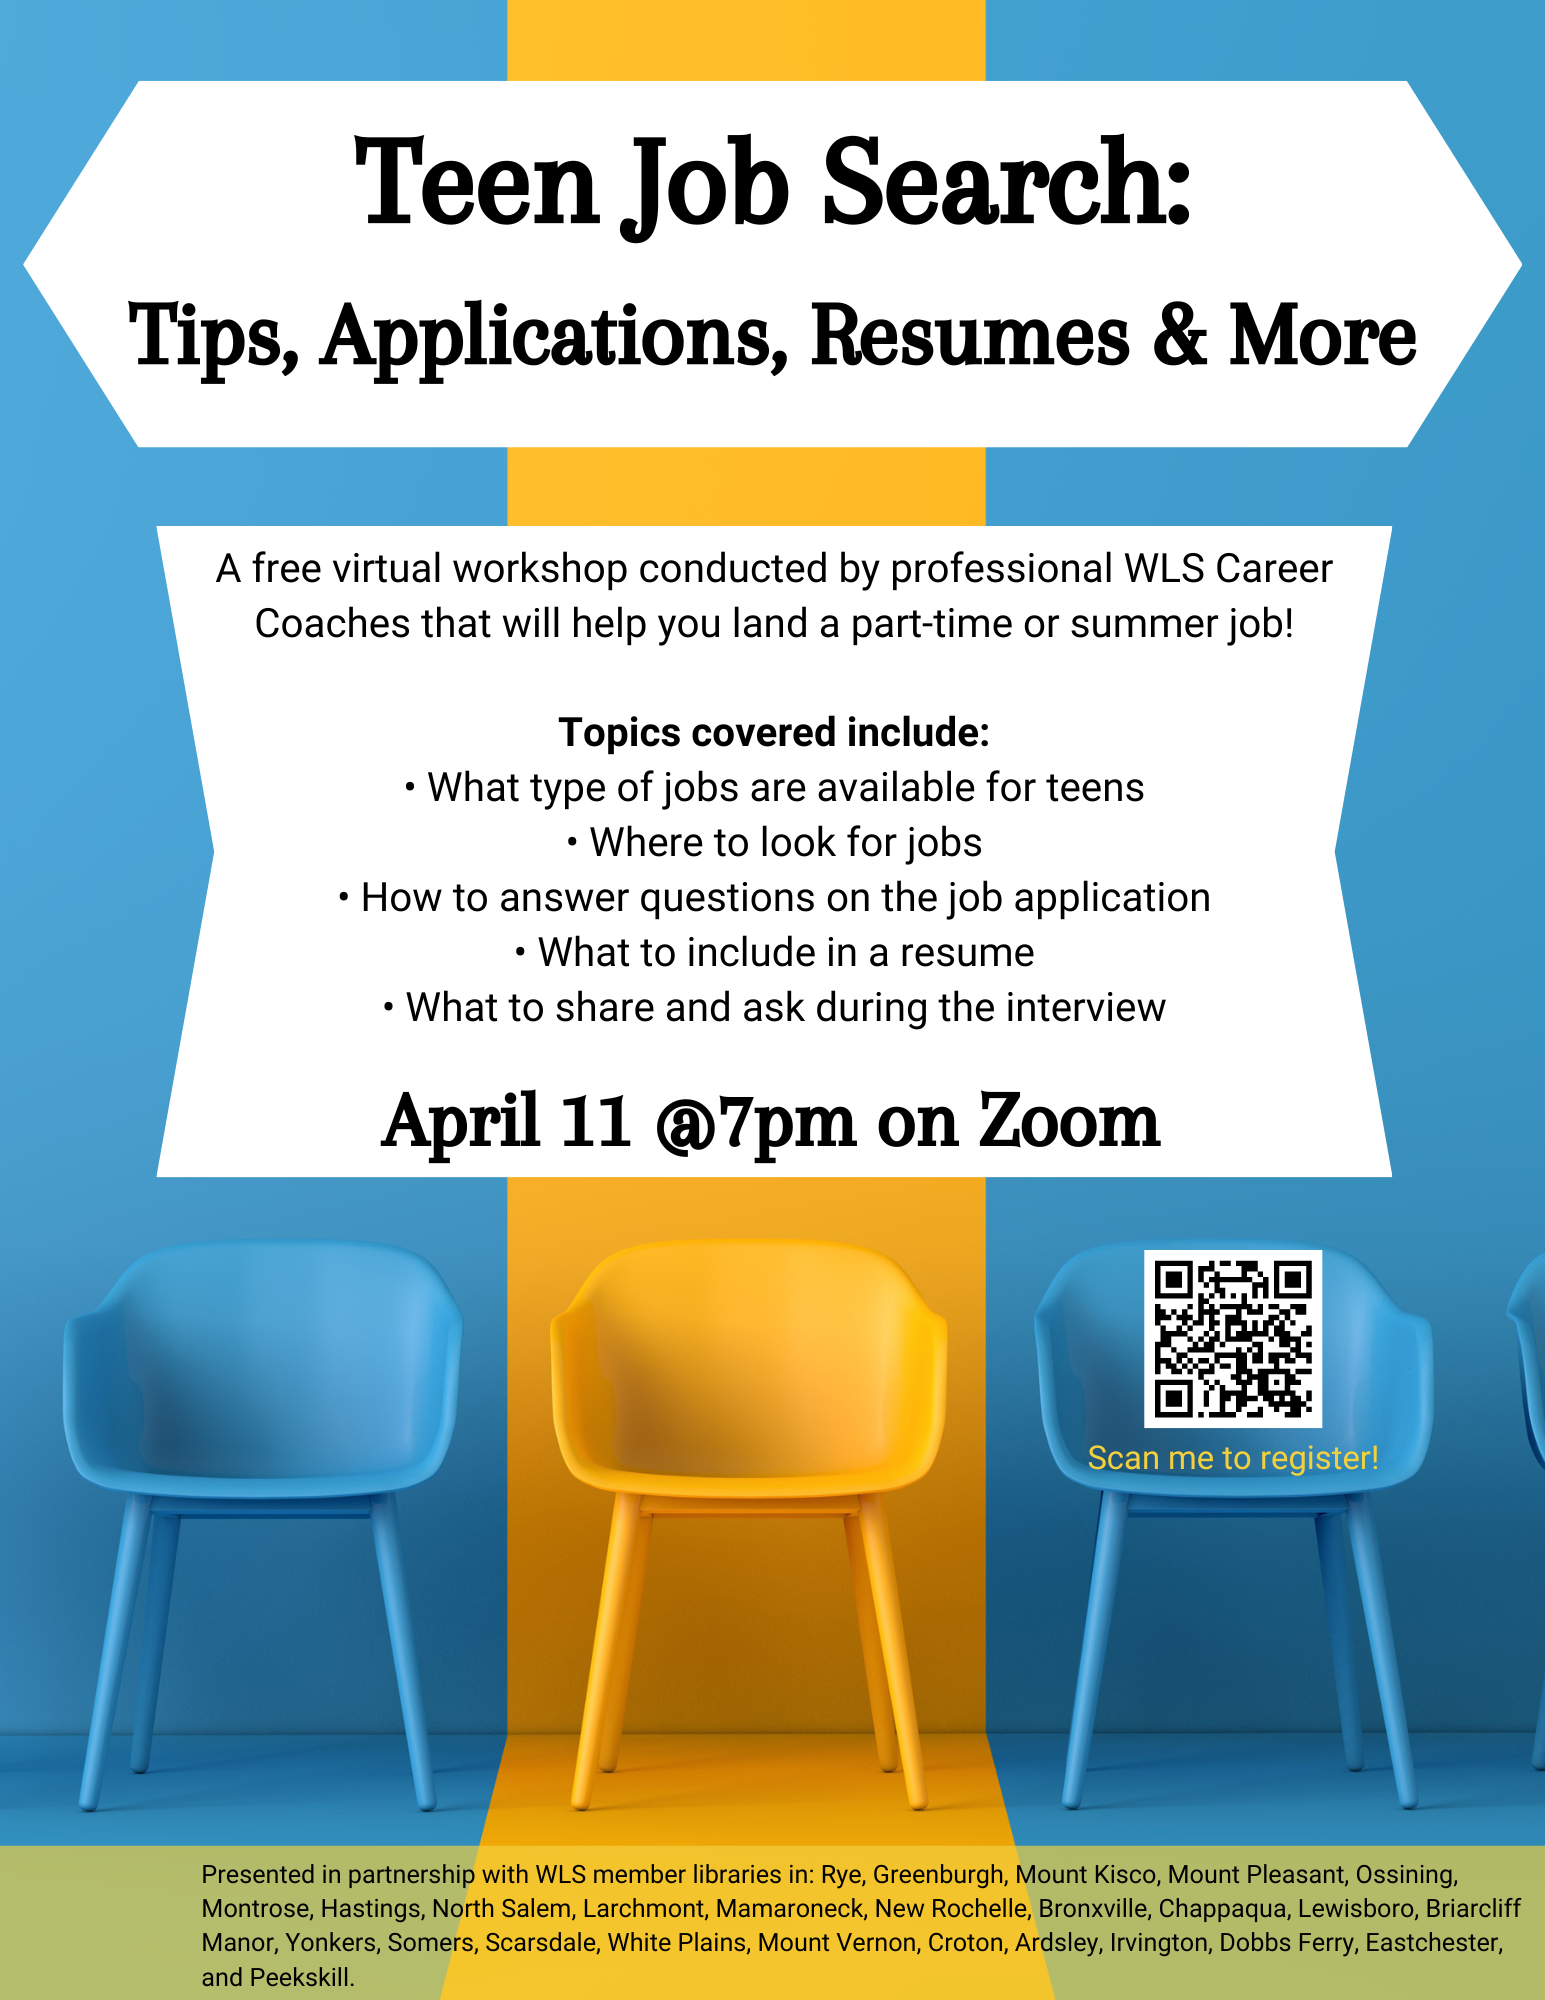 Teen Job Search: Tips, Applications, Resumes & More via ZOOM (Registration)